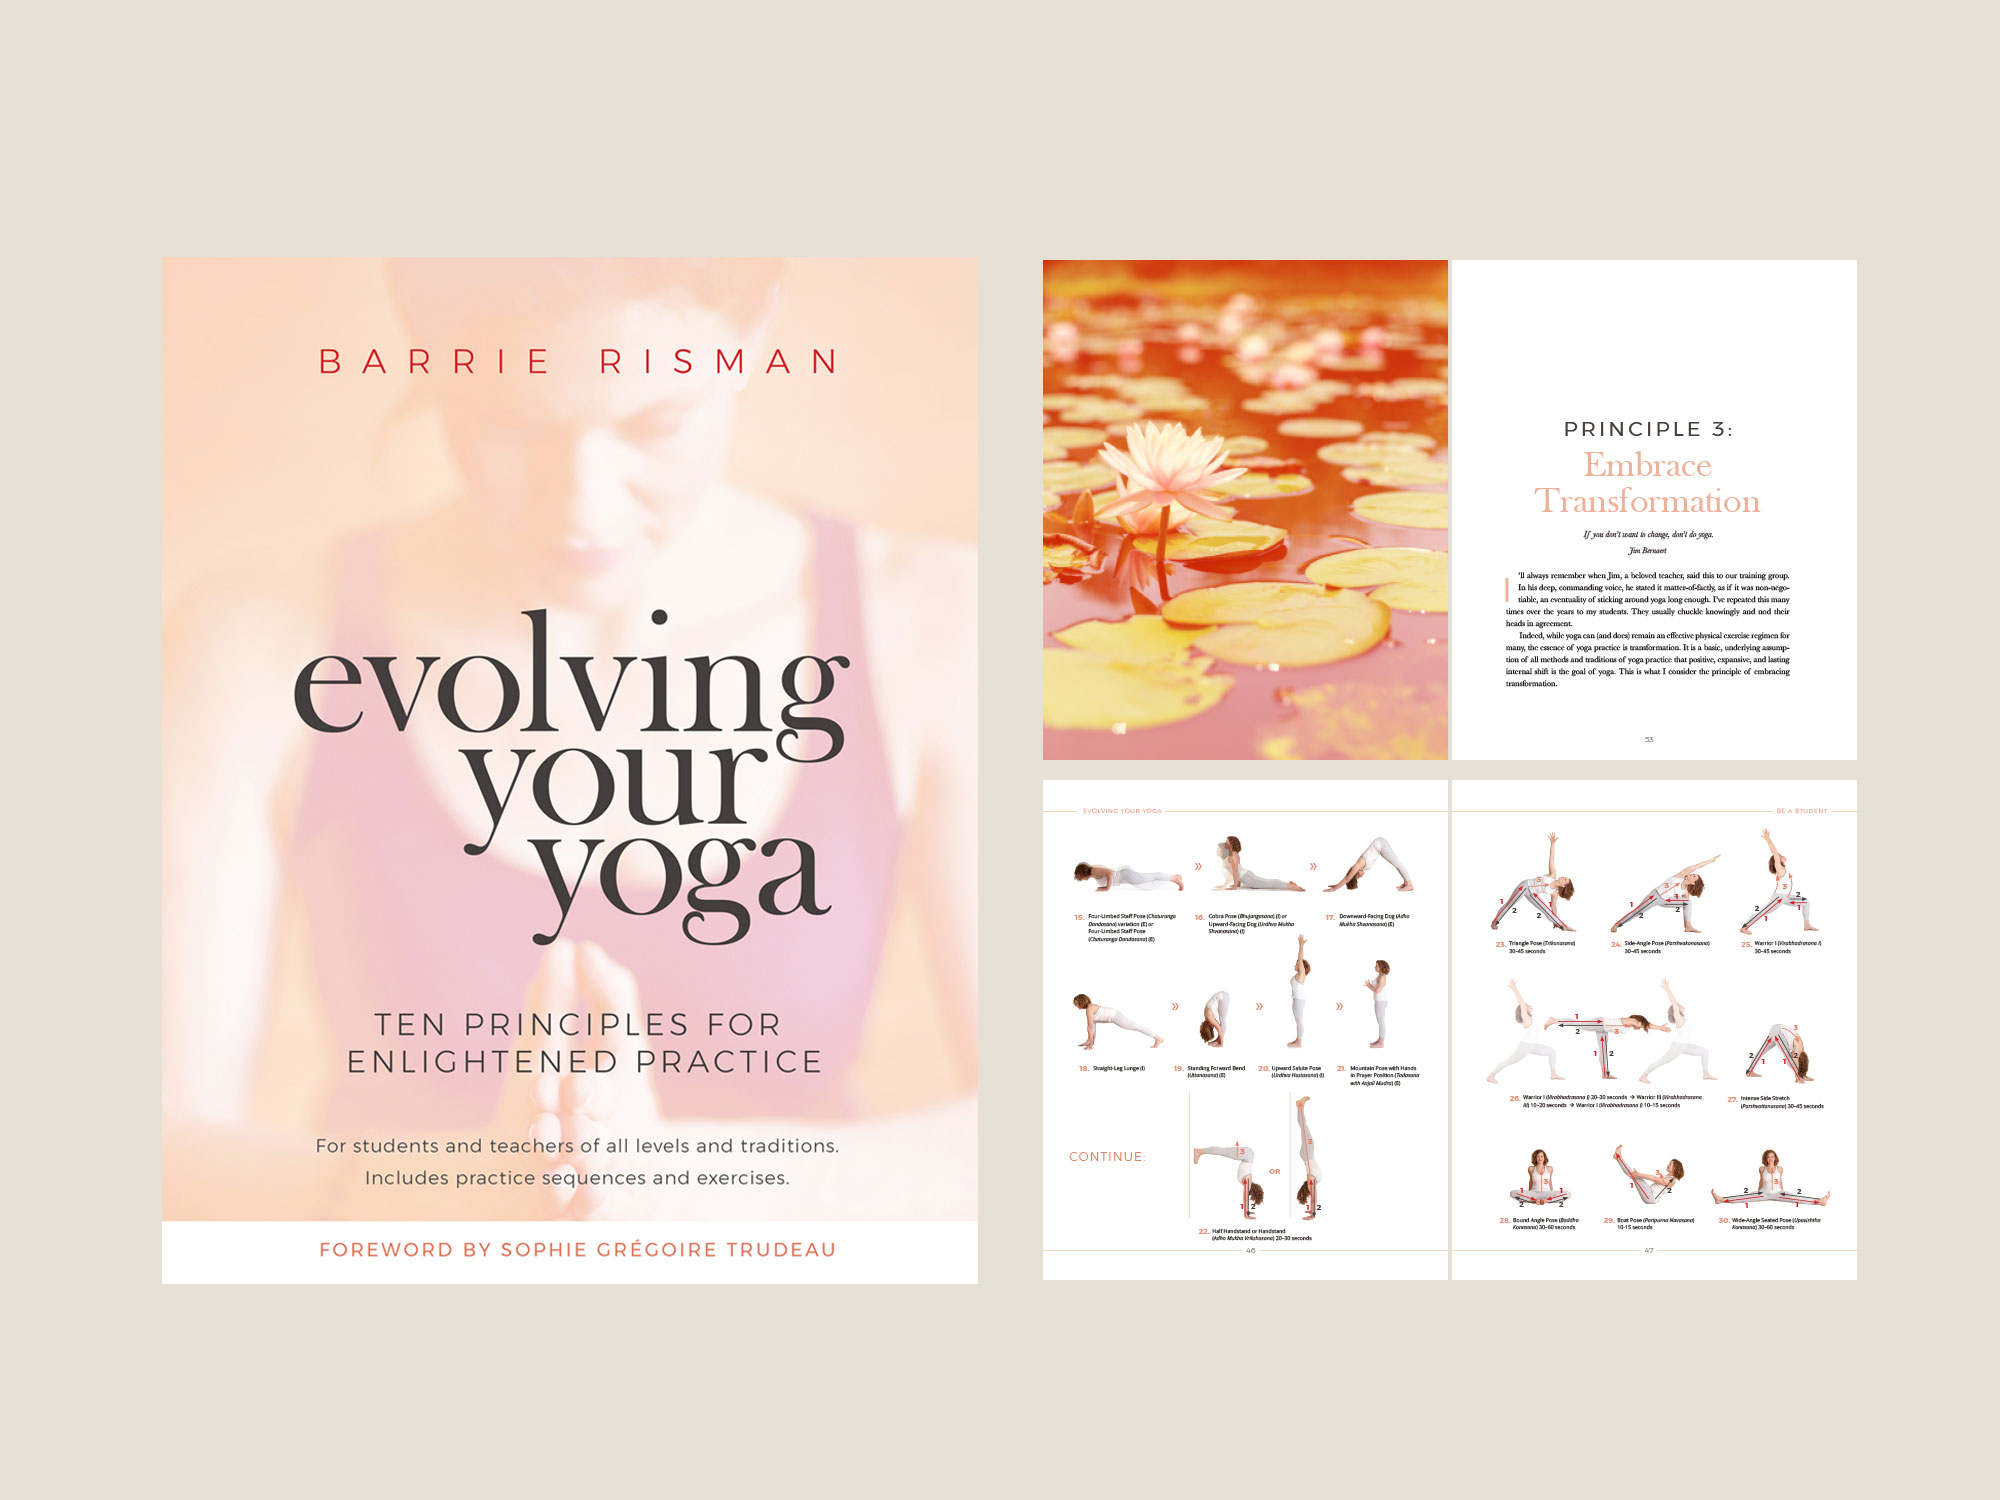 Book: Evolving Your Yoga, by Barrie Risman